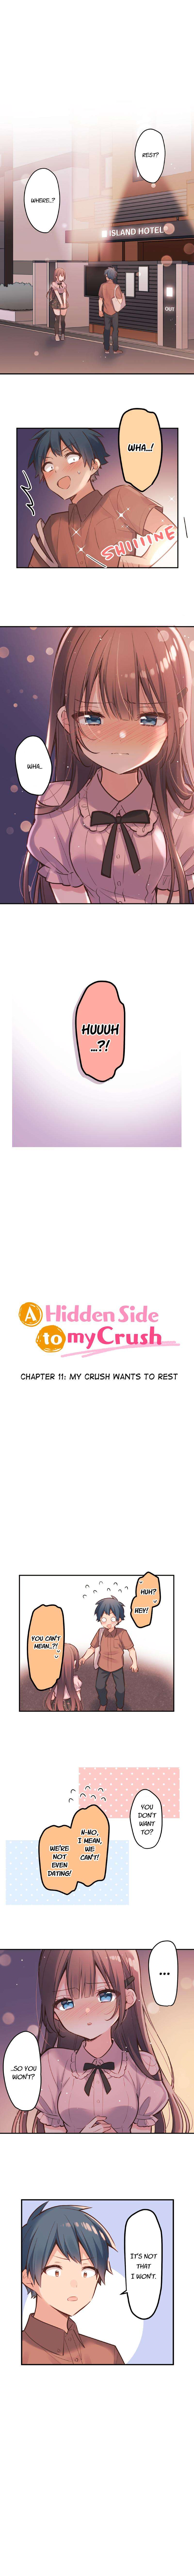 A Hidden Side to My Crush - chapter 11 - #1